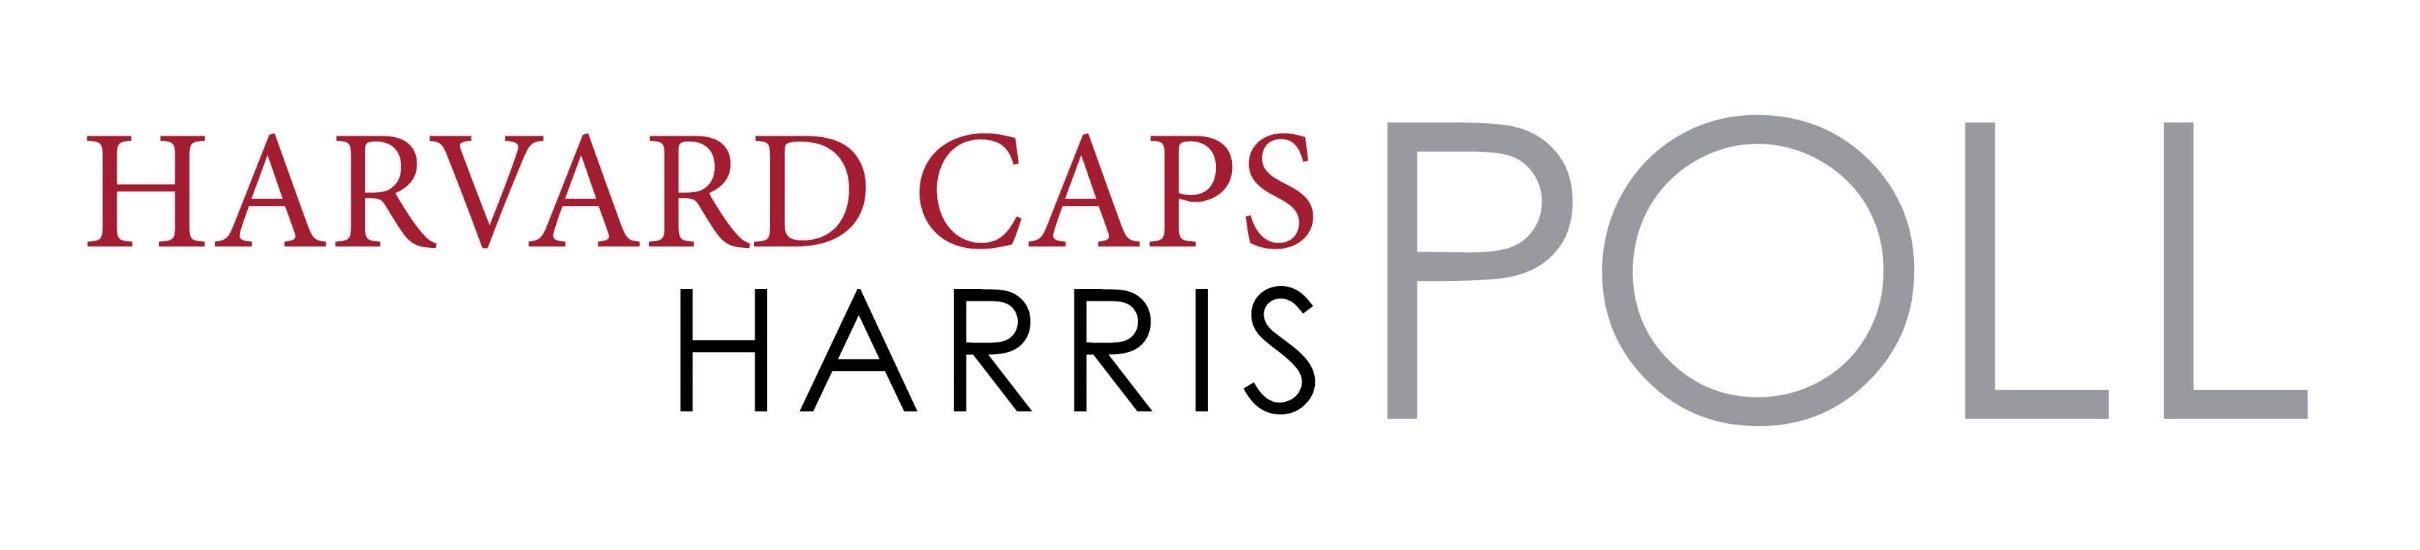 The Harvard-CAPS Harris Poll is a monthly research collaboration between the Harvard Center for American Political Studies and the Harris Poll (PRNewsfoto/Stagwell Inc.)